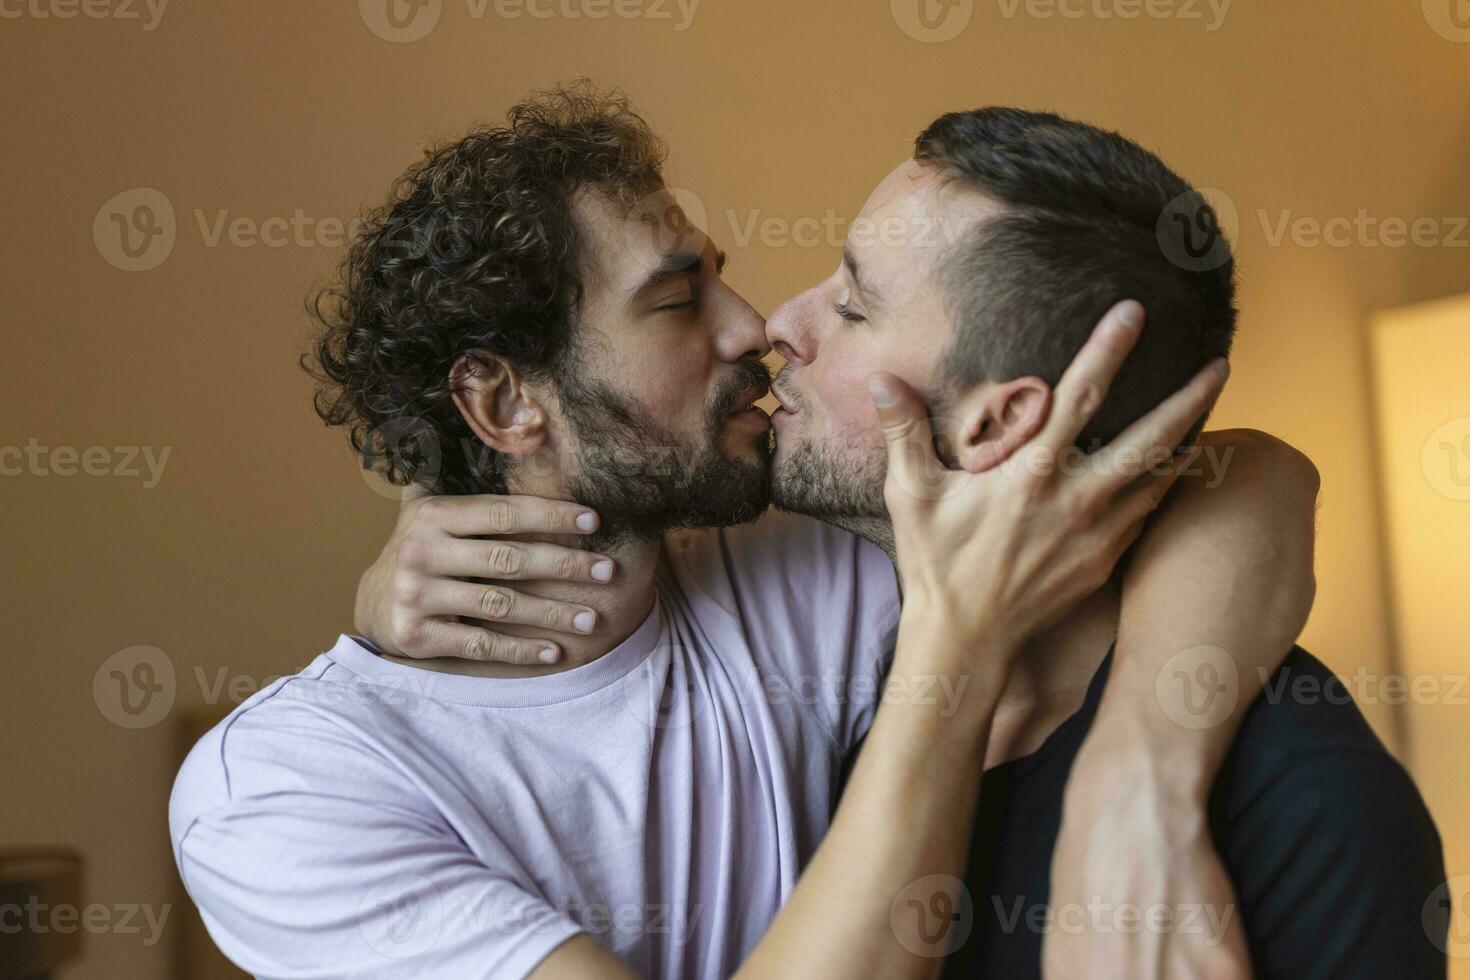 Two young man lgbtq gay couple dating in love hugging enjoying intimate tender sensual moment together kissing with eyes closed photo